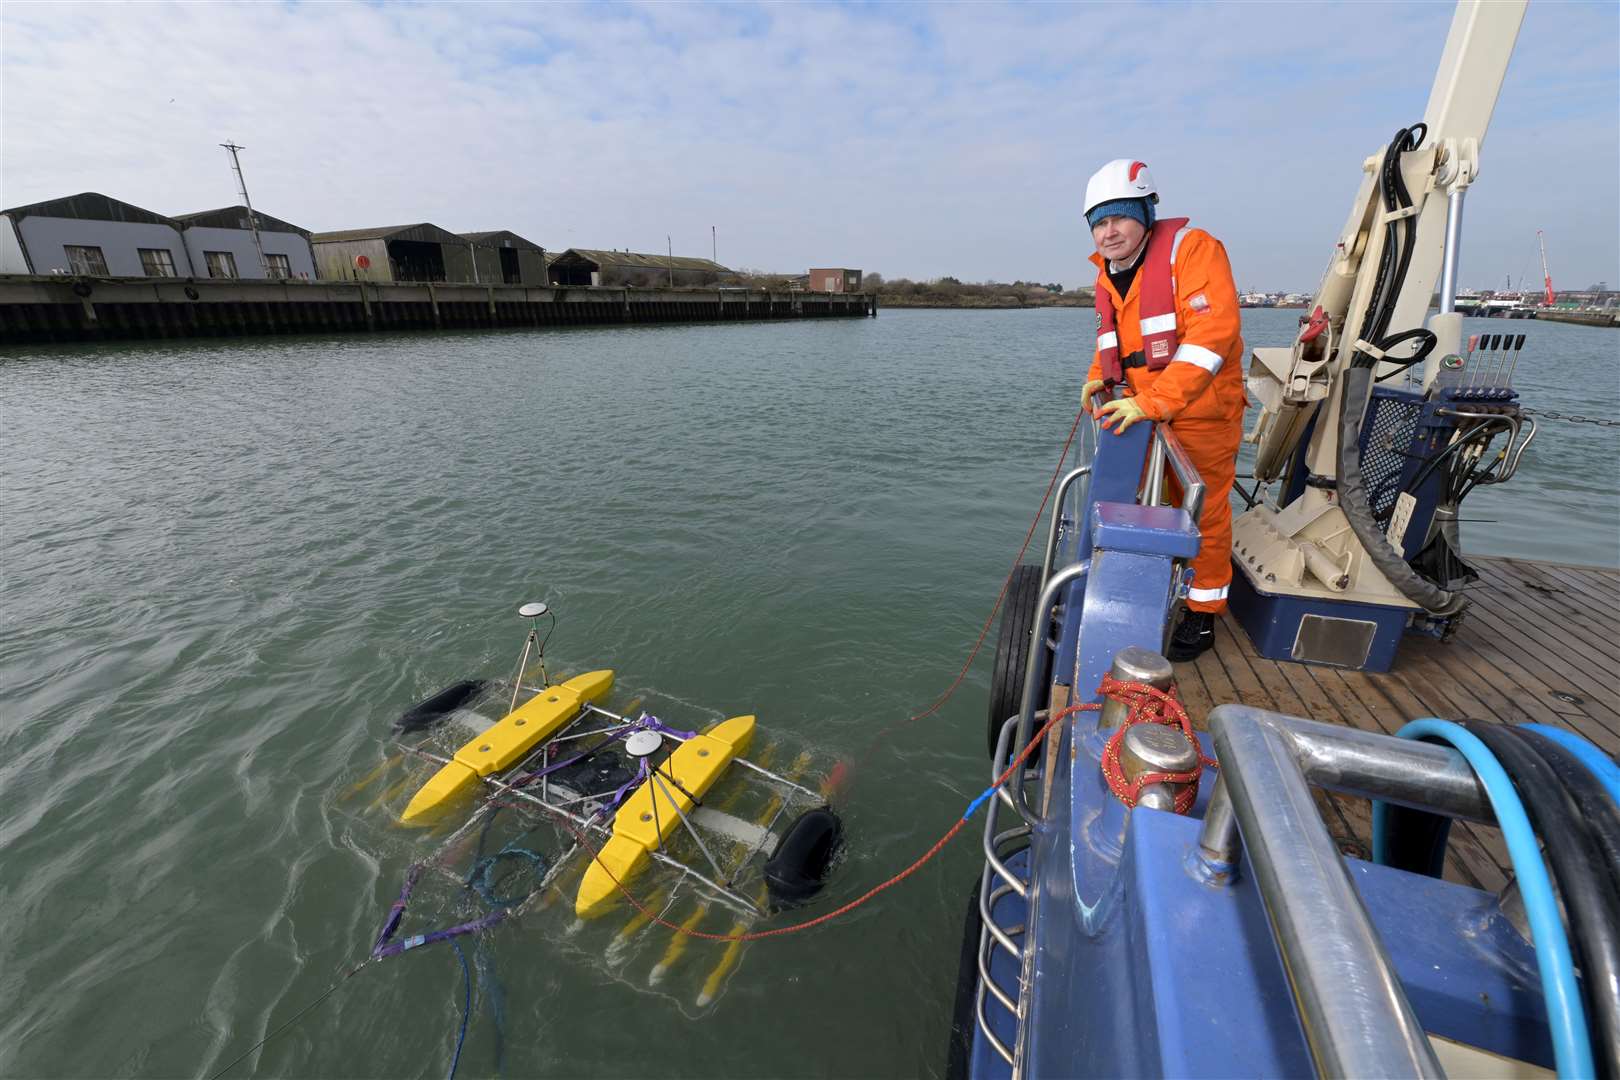 Equipment used Safelane Global to survey Lake Lothing in Lowestoft, Suffolk. Picture: Rob Howarth PhotographyCopyright Rob Howarth Photography